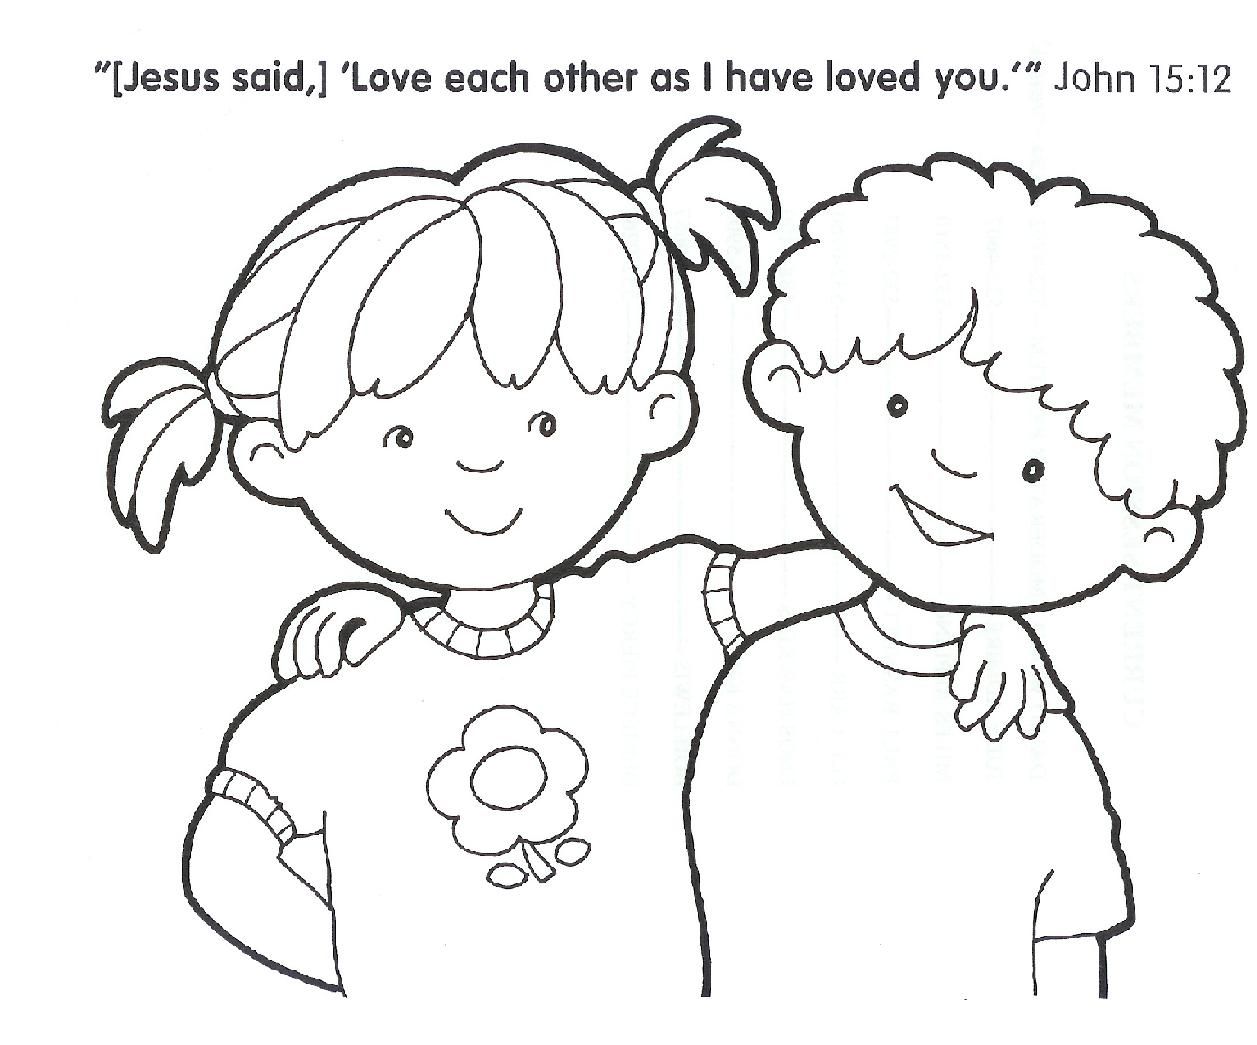 Spanish Gospel Coloring Page - Coloring Home